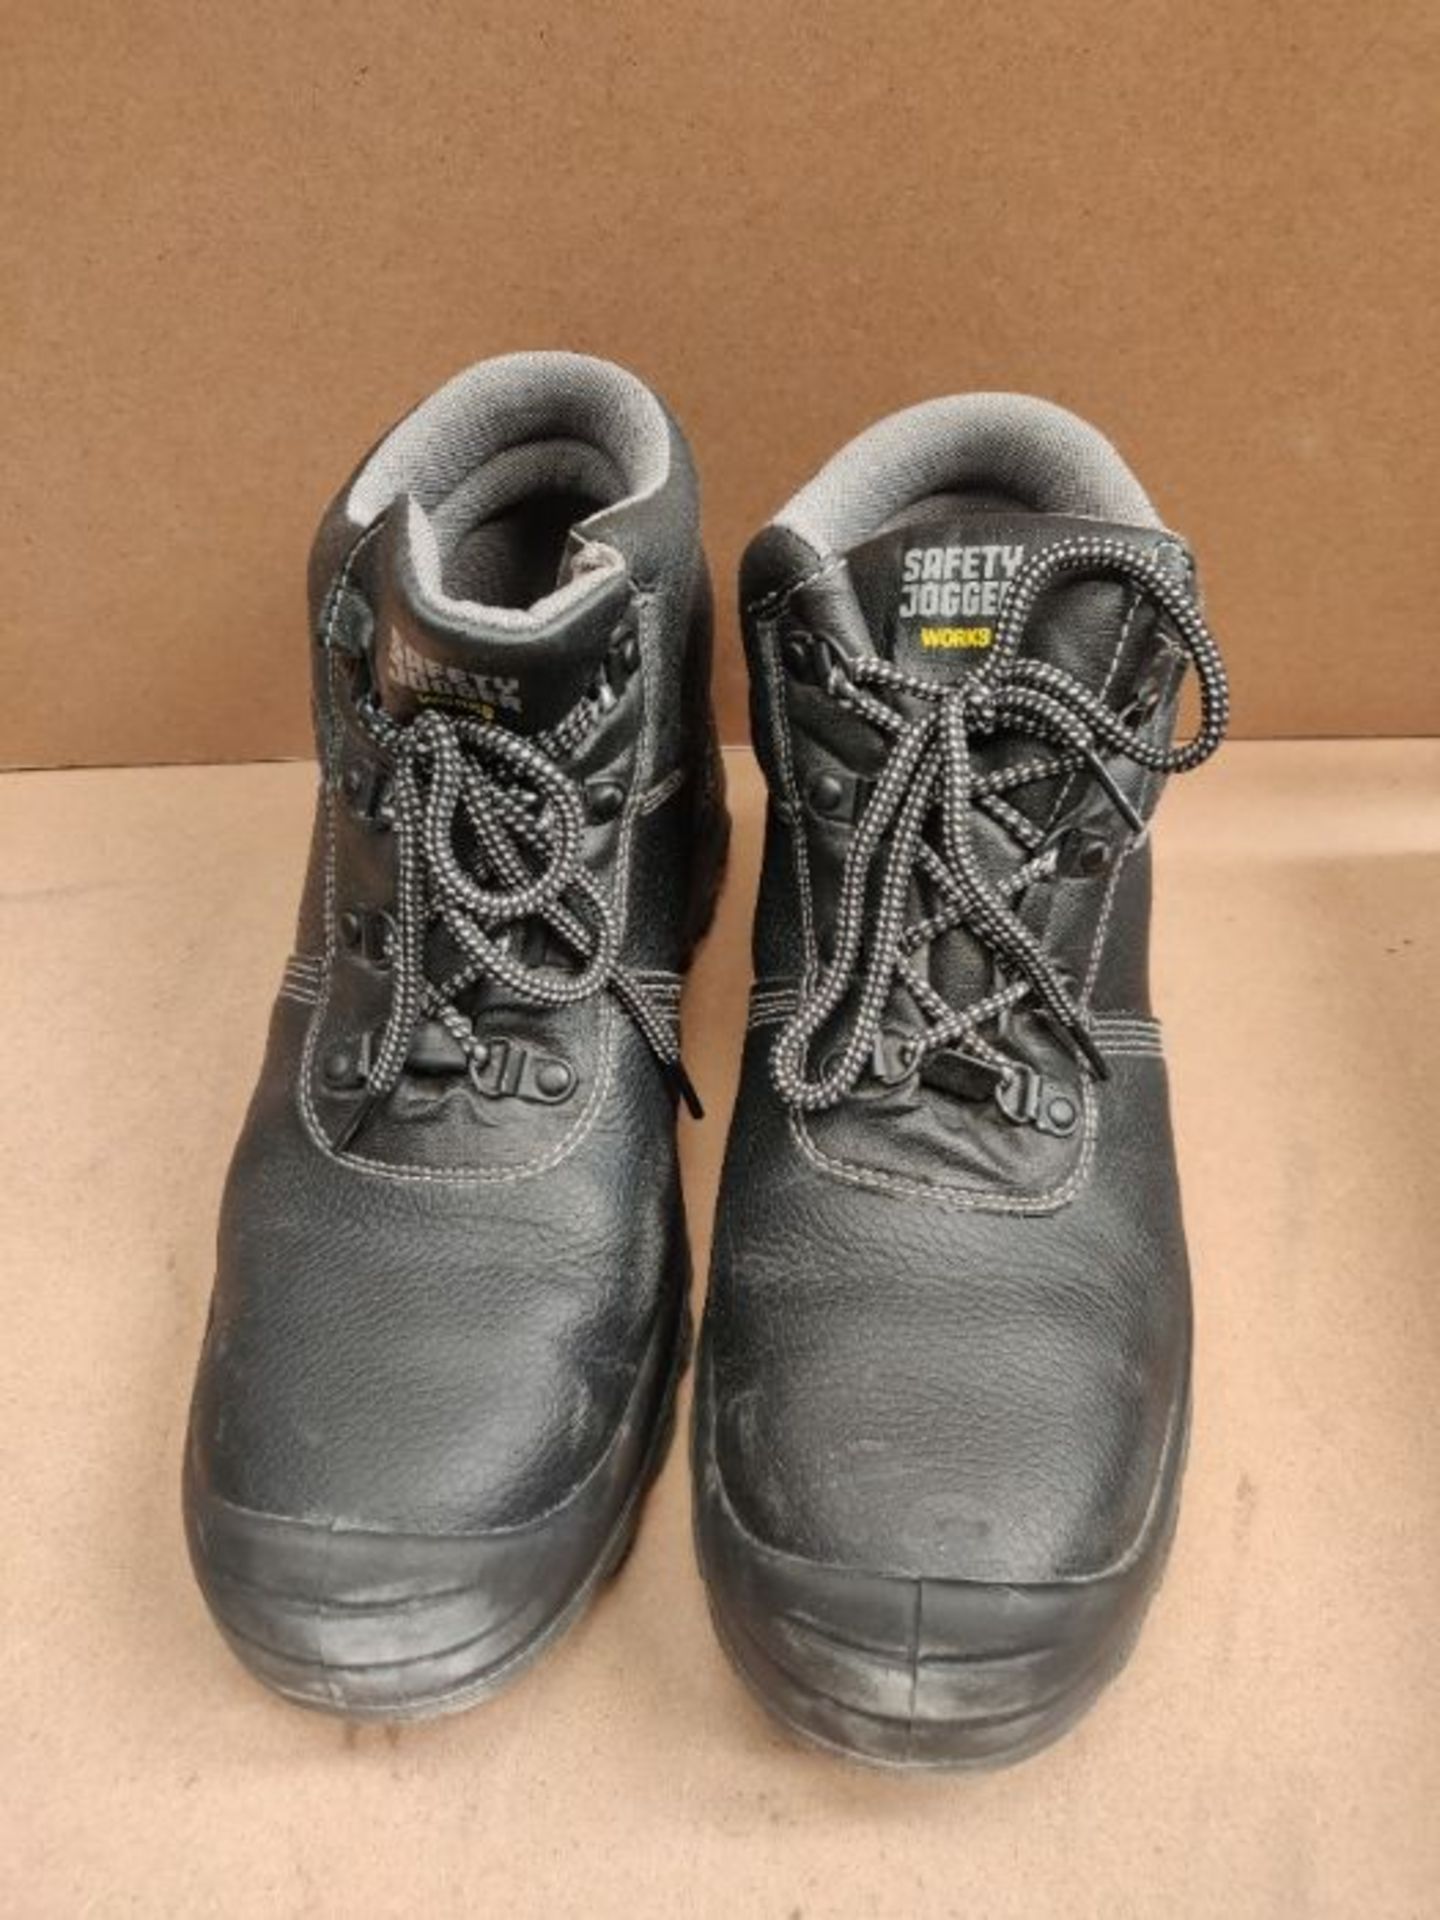 Safety Jogger Safety Boot - Steel Toe Cap S3/S1P Work Shoe for Men or Women, Anti Slip - Image 3 of 3